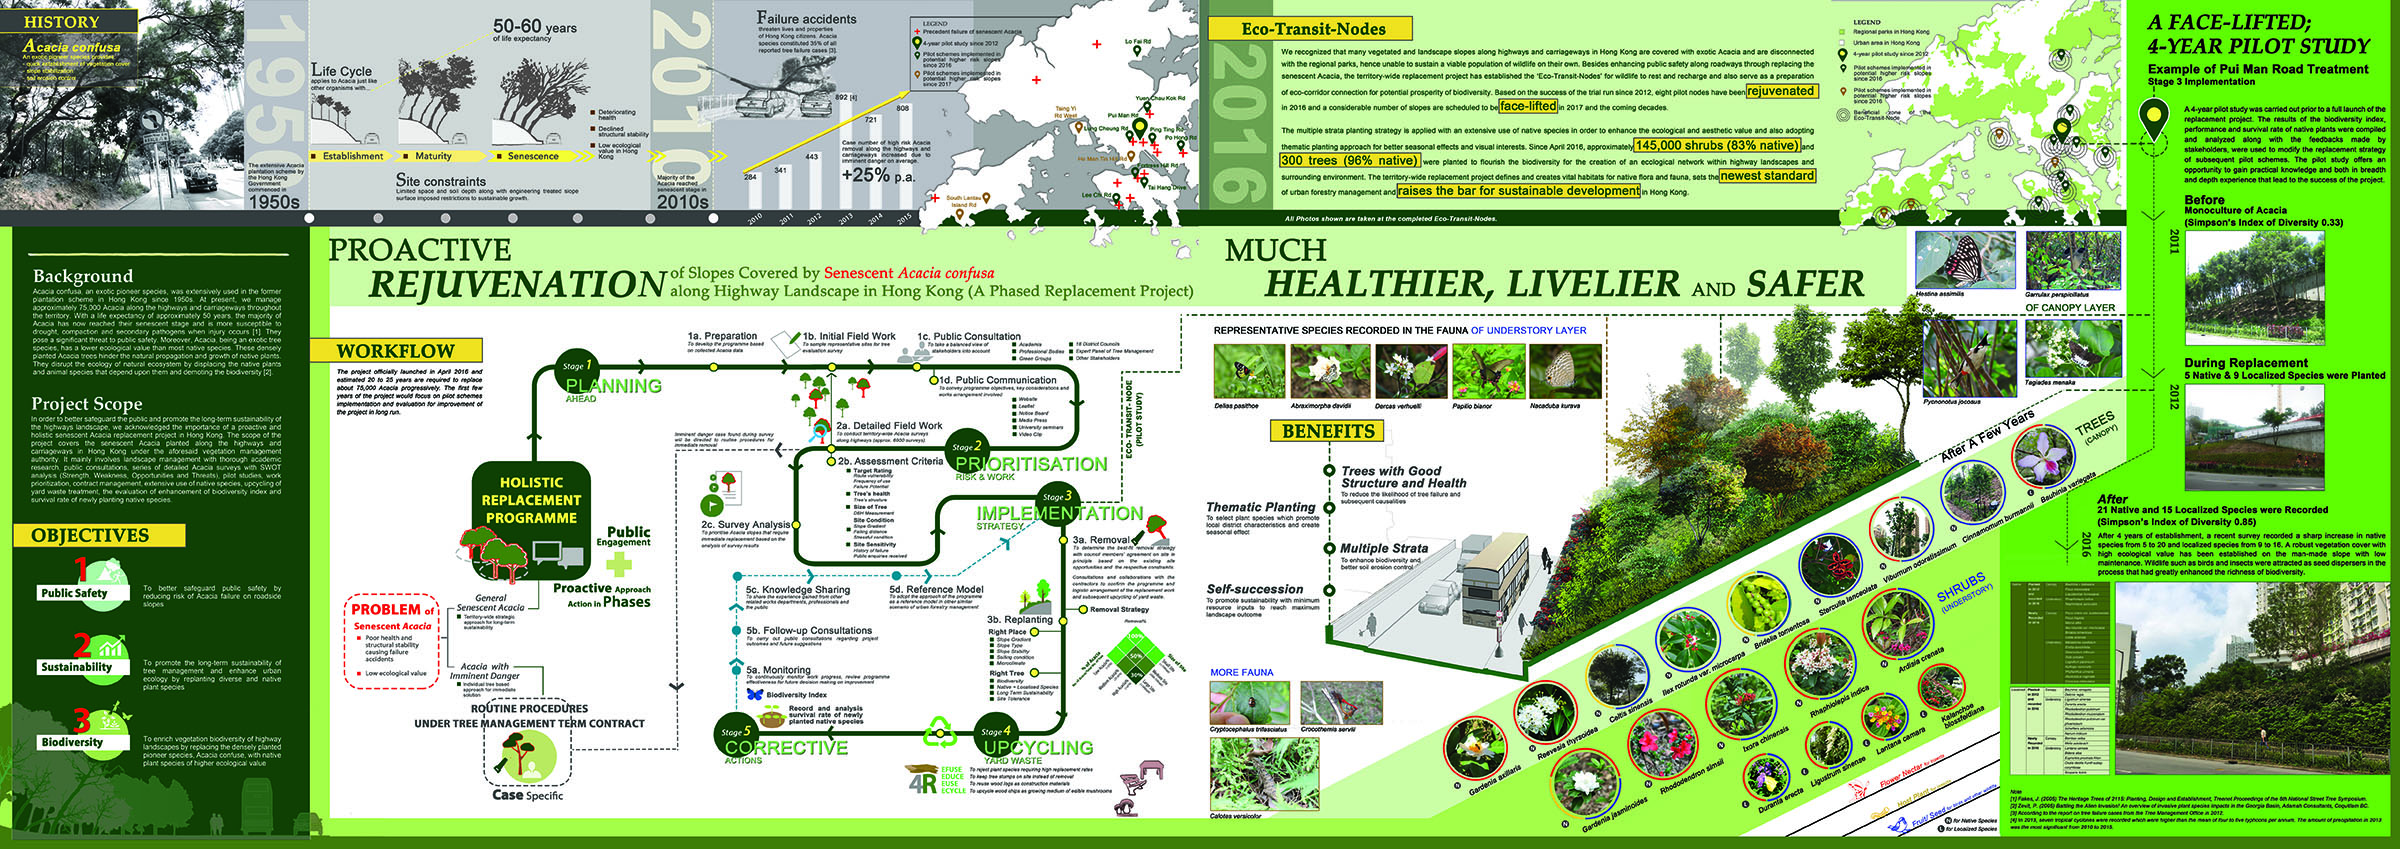 'The International Federation of Landscape Architects Asia-Pacific region Landscape Architecture Awards 2017 (Analysis and Master Planning category) Honourable Mention (Merit)' presented to Highways Department - 'Proactive Rejuvenation of Senescent Acacia Slopes along Highways in Hong Kong' [The award-winning presentation board]